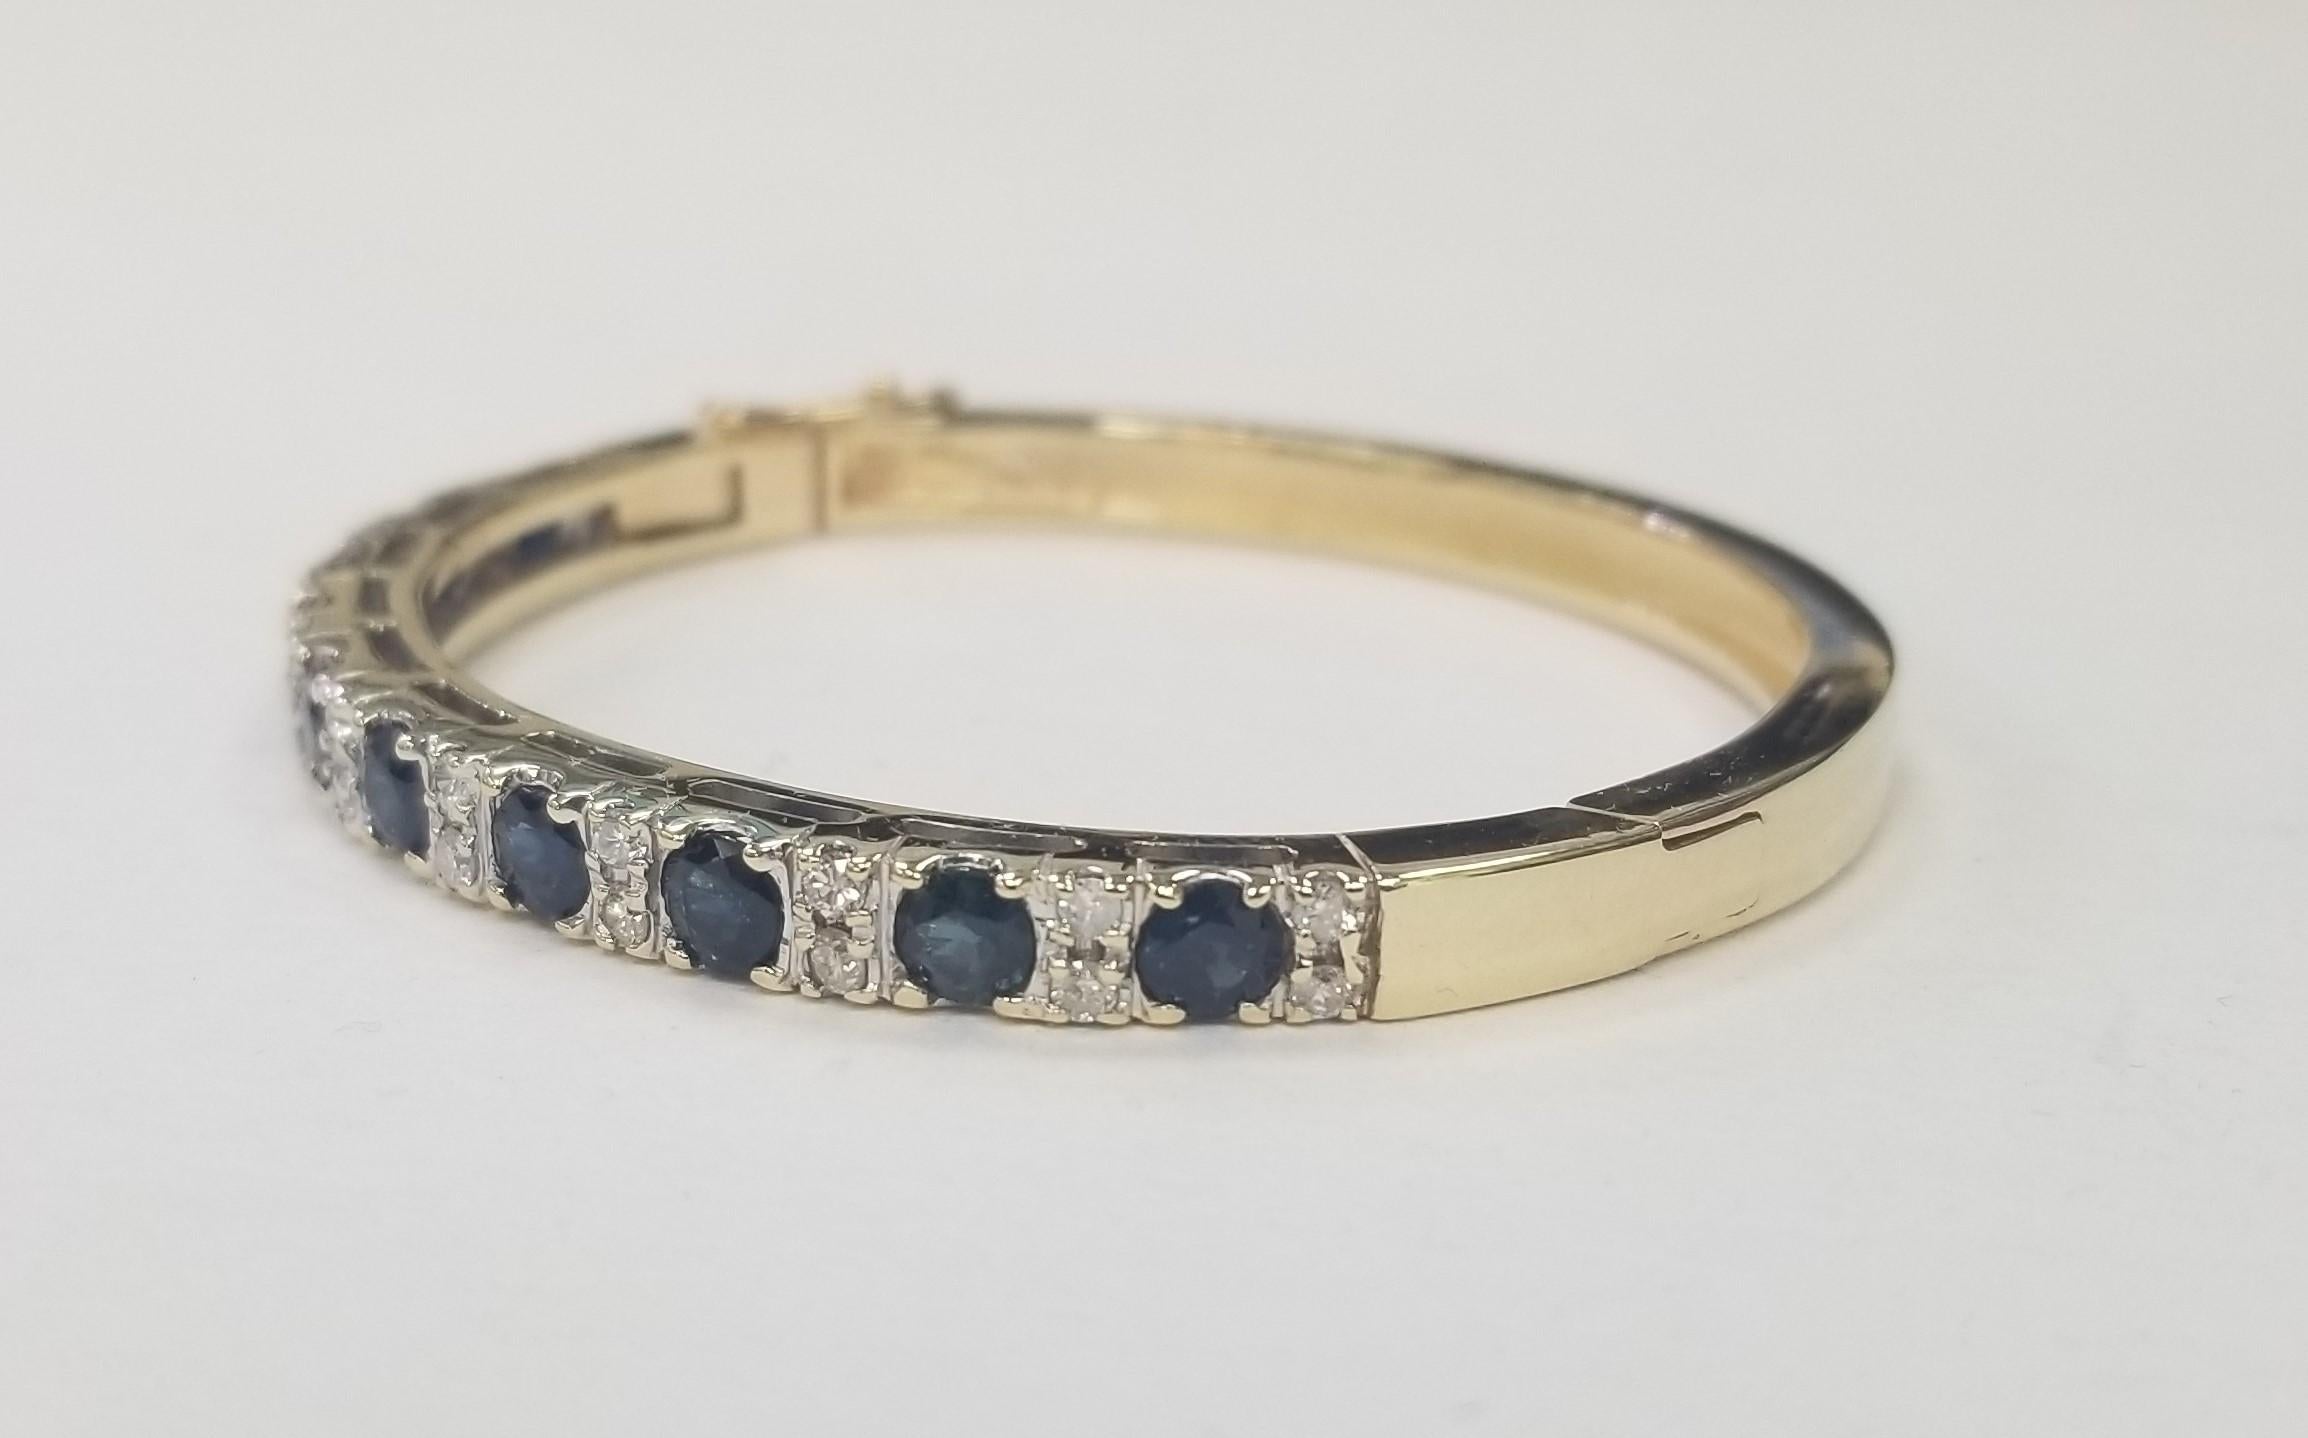 DIAMOND TENNIS BRACELET 
Specifications:
*Motivated to Sell - Please make a Fair Offer*
    main stone: 10 Round Sapphires 3.50cts.
    diamonds: 22 round Diamonds 
    weight: .50pts.
    color: H
    clarity: VS2-SI1
    metal:  14K gold
    type: